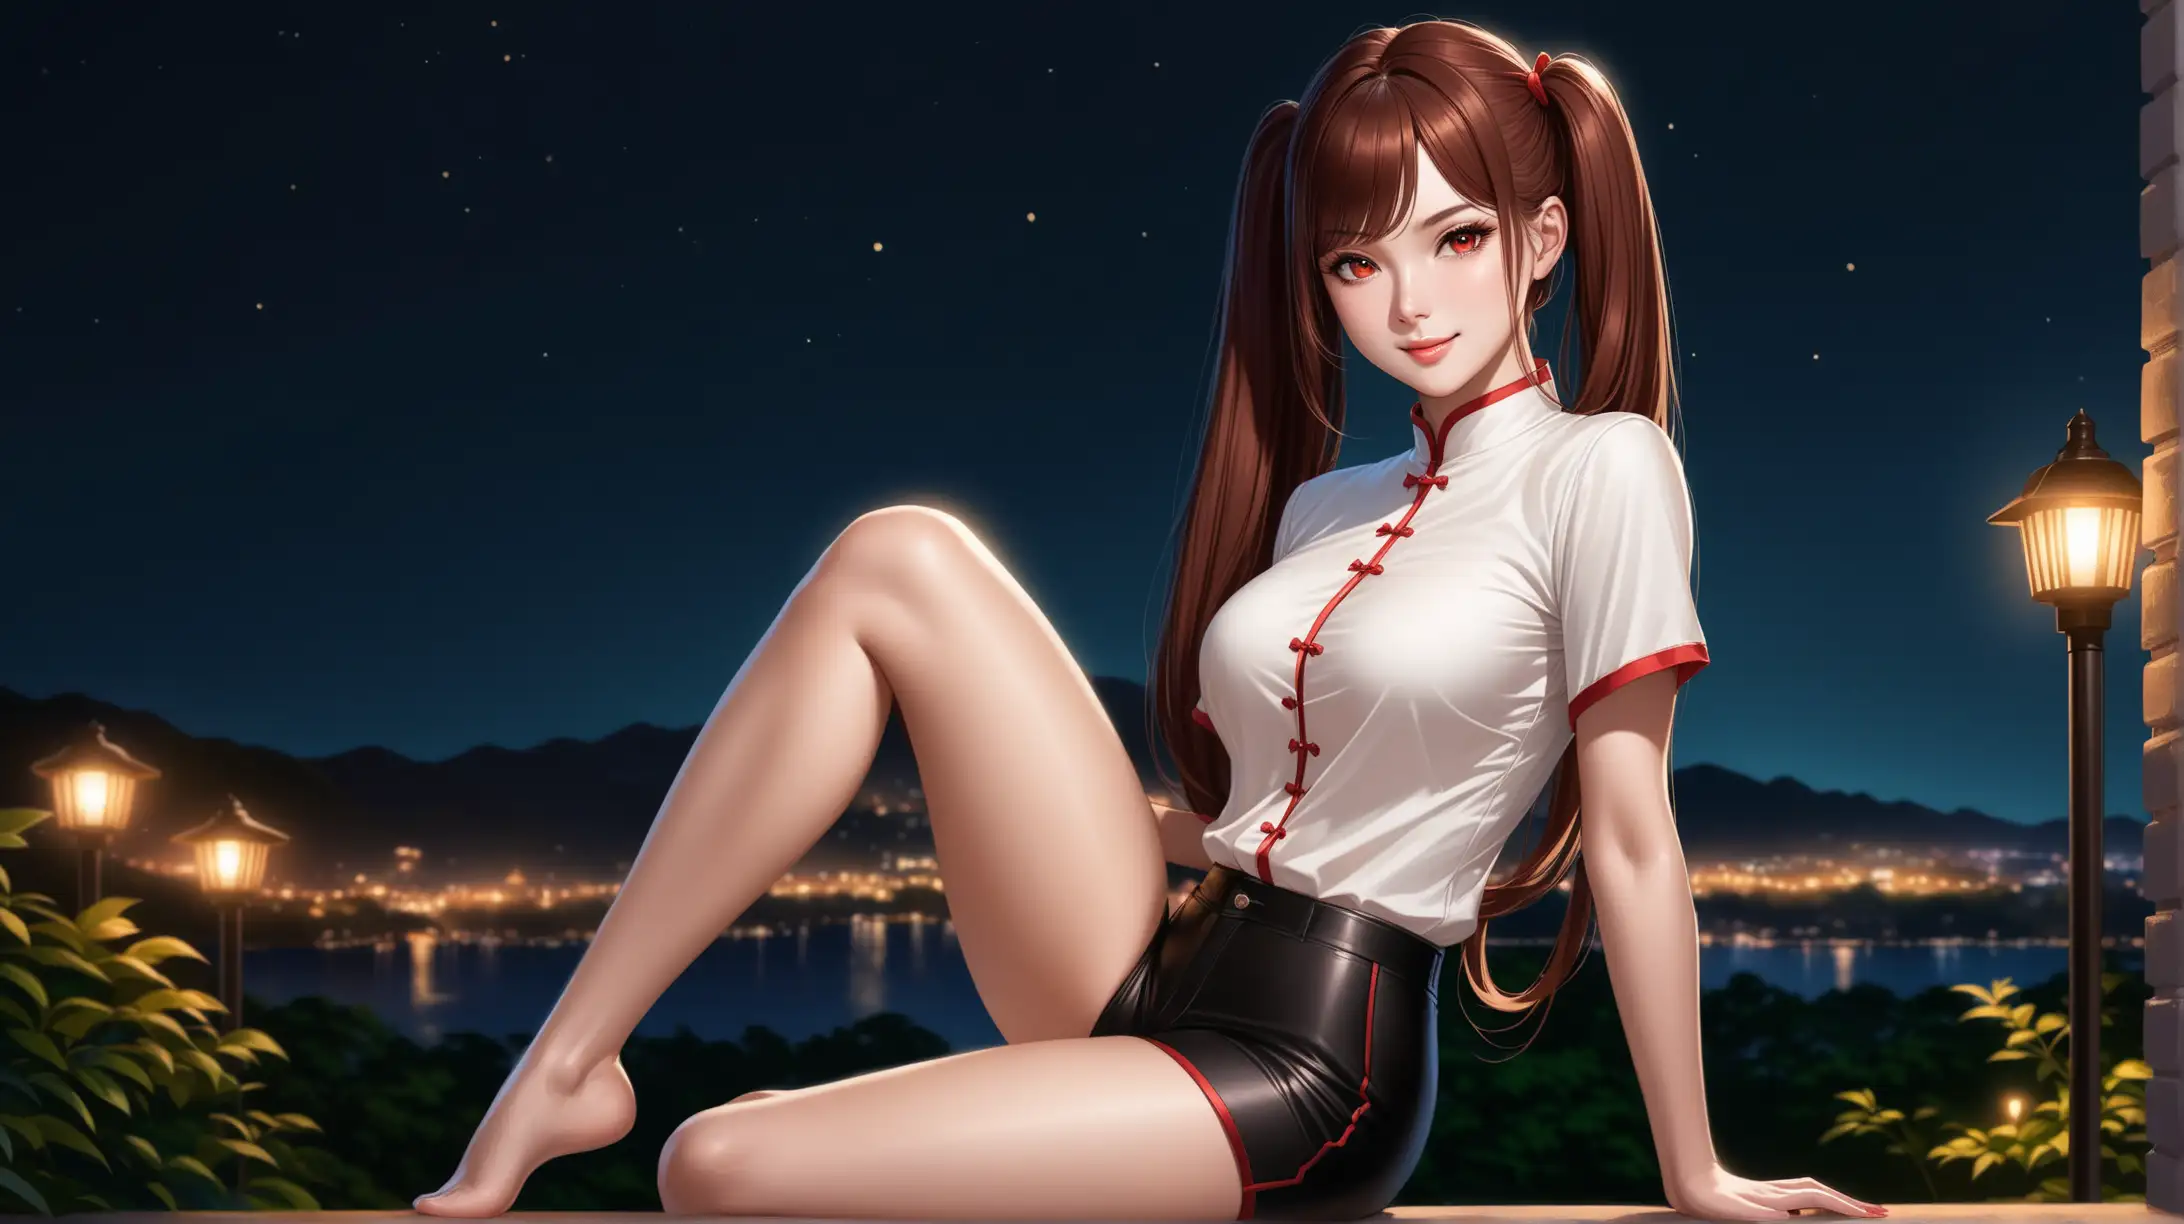 Draw a woman, extremely long reddish-brown hair, two high parted twintails, side locks, side-swept bangs, scarlet eyes, perky figure, high quality, realistic, accurate, detailed, long shot, night lighting, outdoors, seductive pose, black shorts, mandarin collar shirt, smiling at the viewer